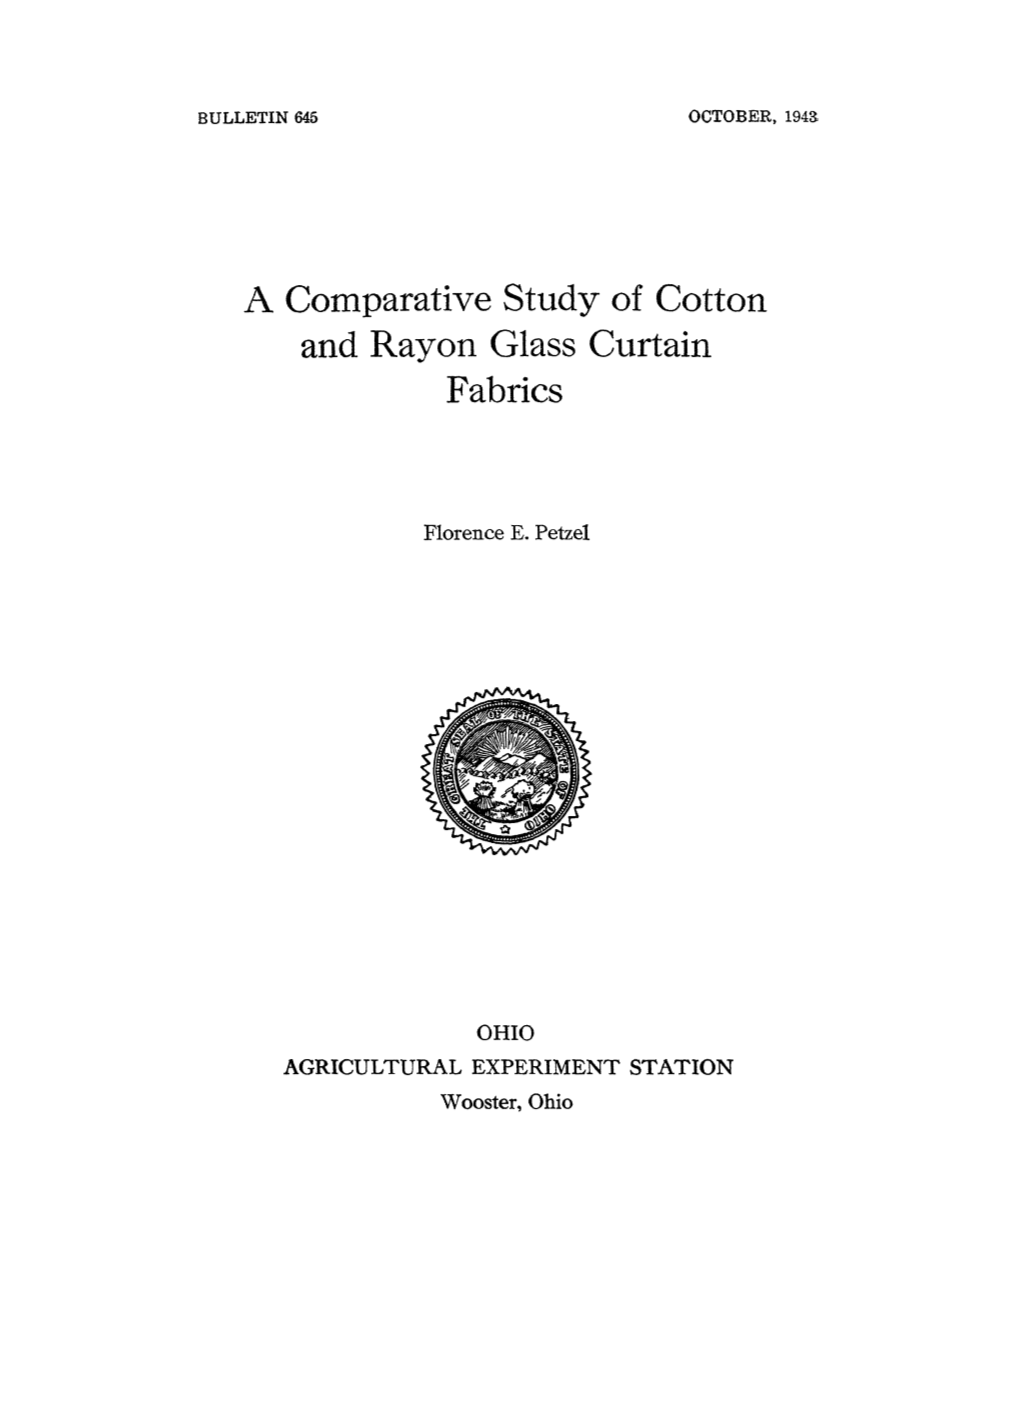 A Comparative Study of Cotton and Rayon Glass Curtain Fabrics